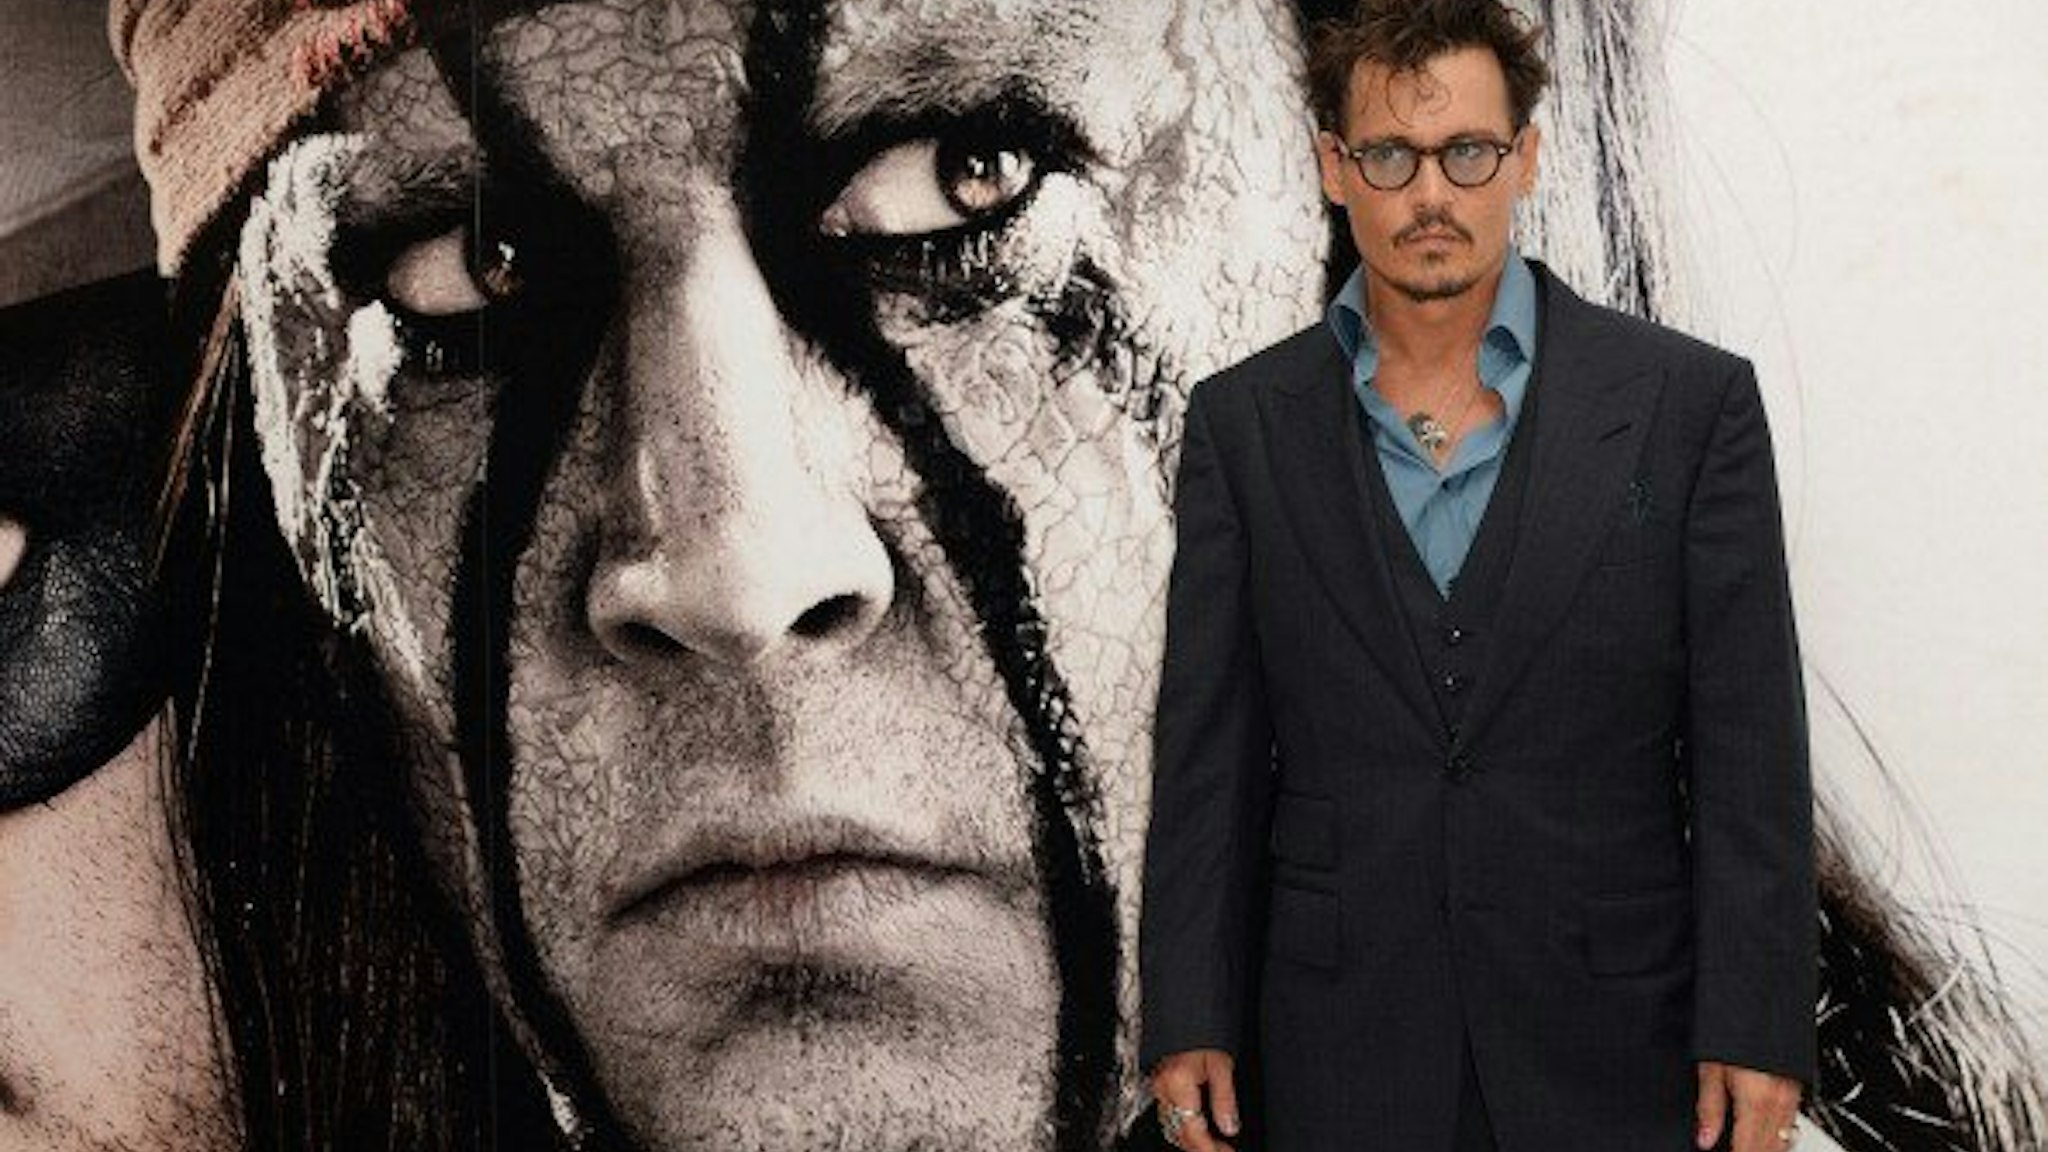 Johnny Depp attends the UK premiere of 'The Lone Ranger' at The Odeon Leicester Square on July 21, 2013 in London, England.